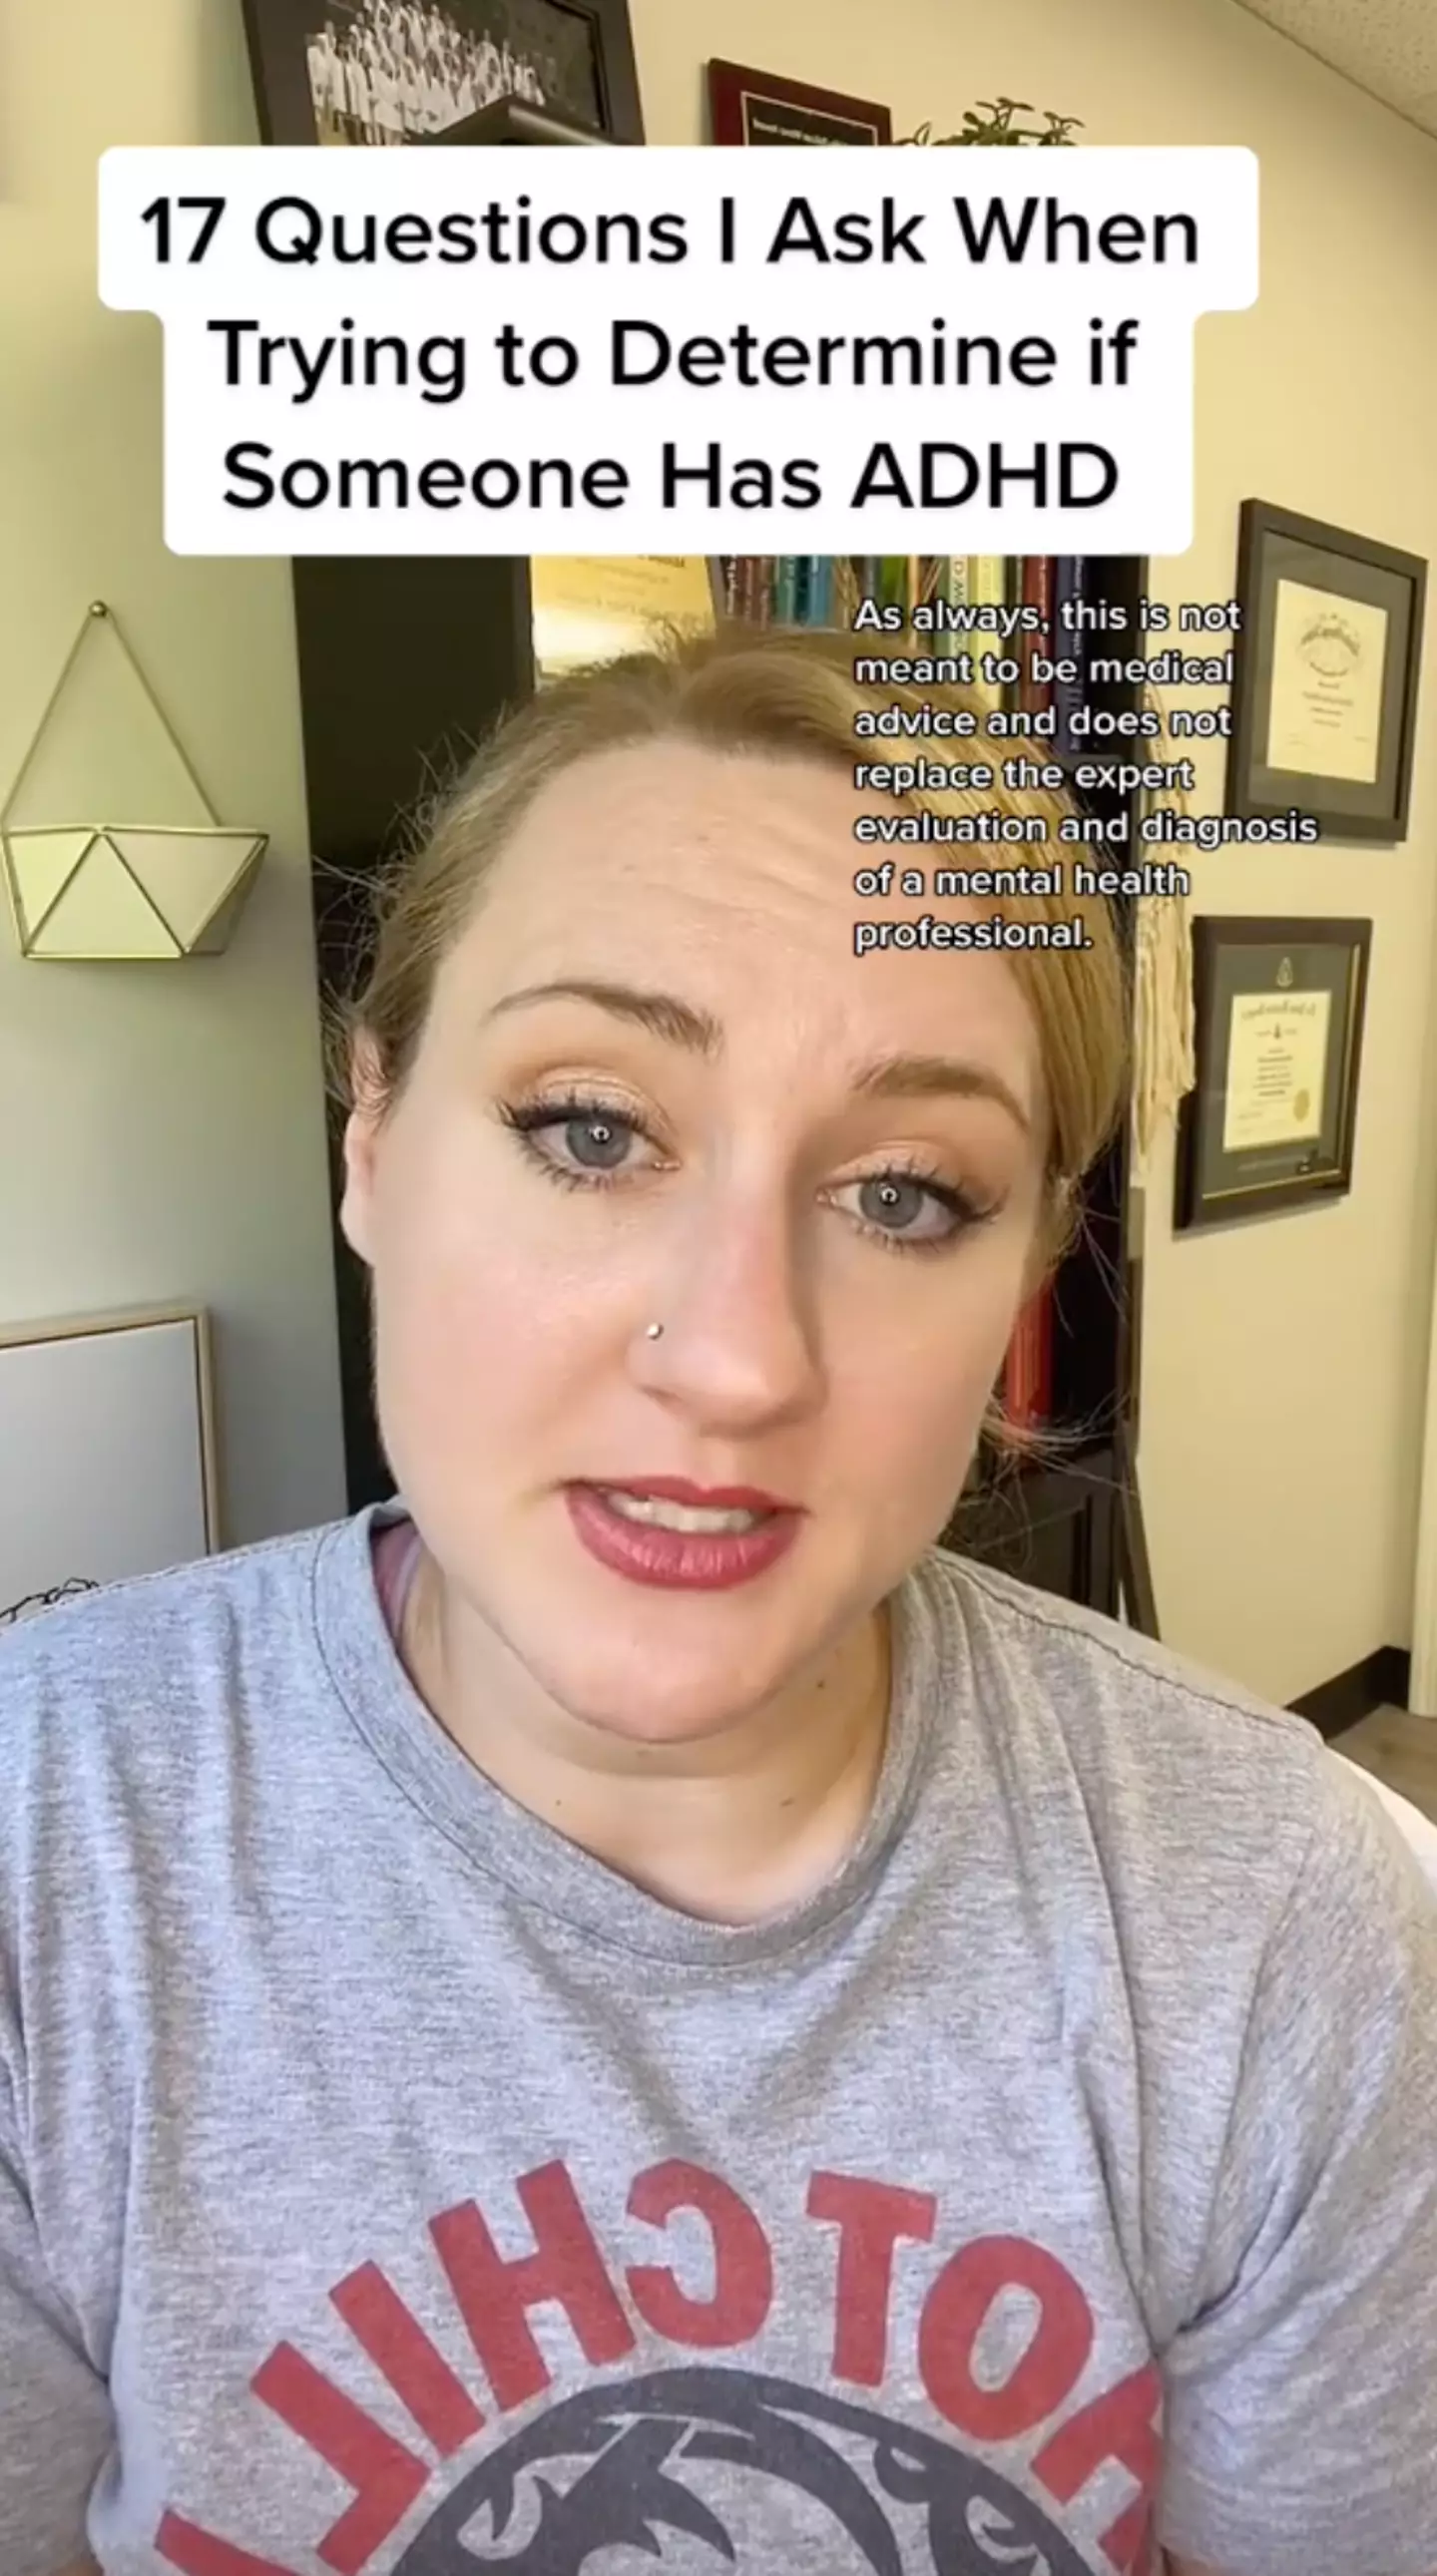 Dr. Melissa Shepard took to TikTok to share the questions she asks patients when assessing them for ADHD.